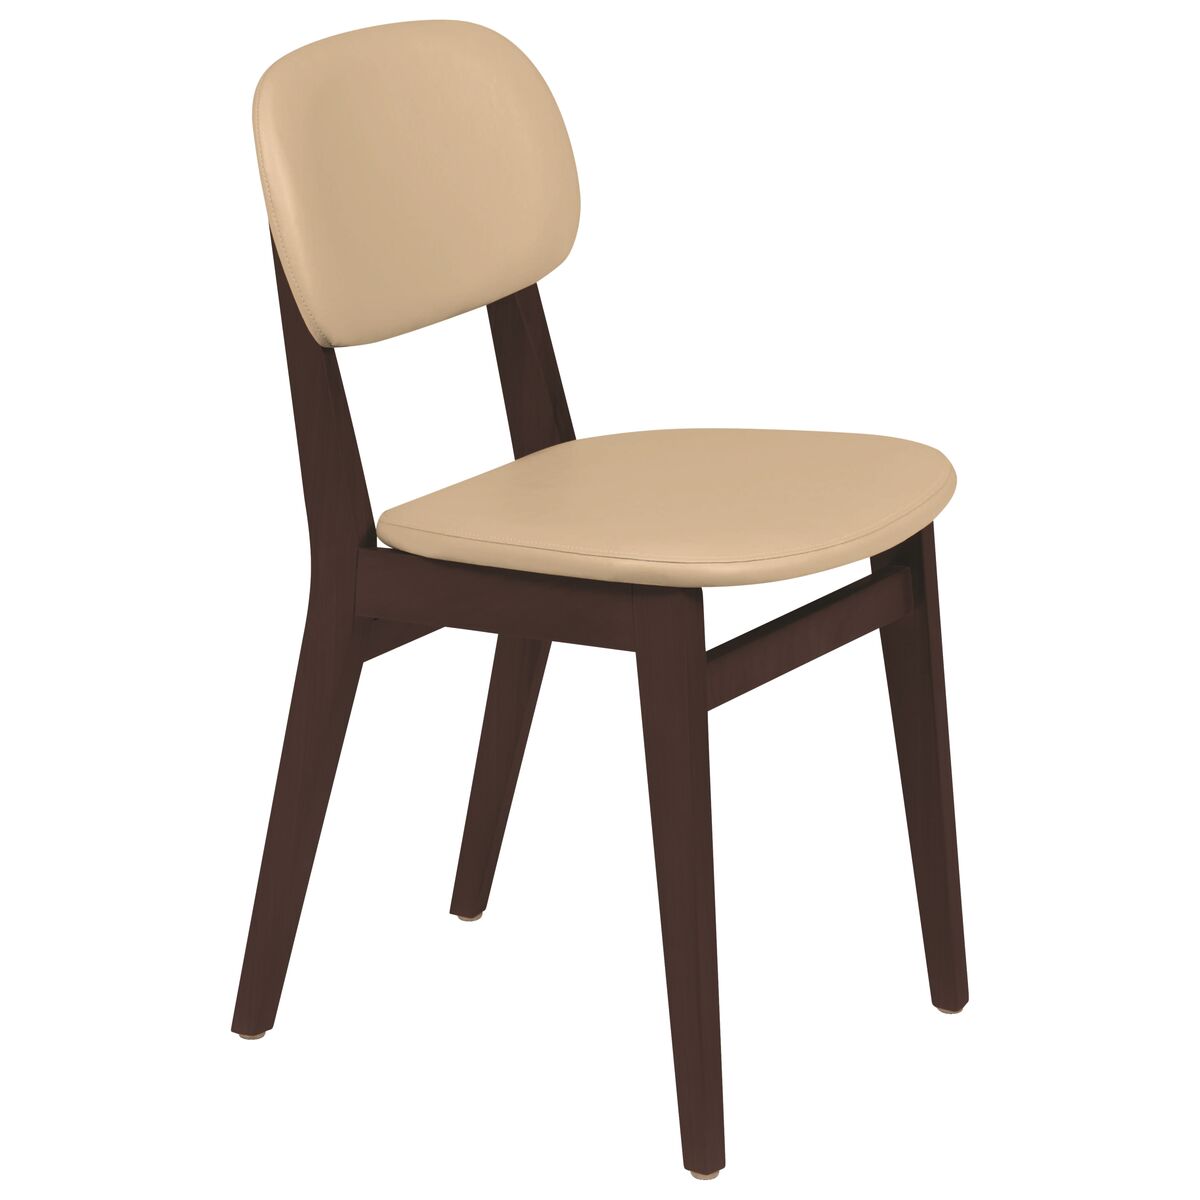 Tramontina London Armless Chair in Dark Brown-colored Tauari Wood with Beige Upholstery